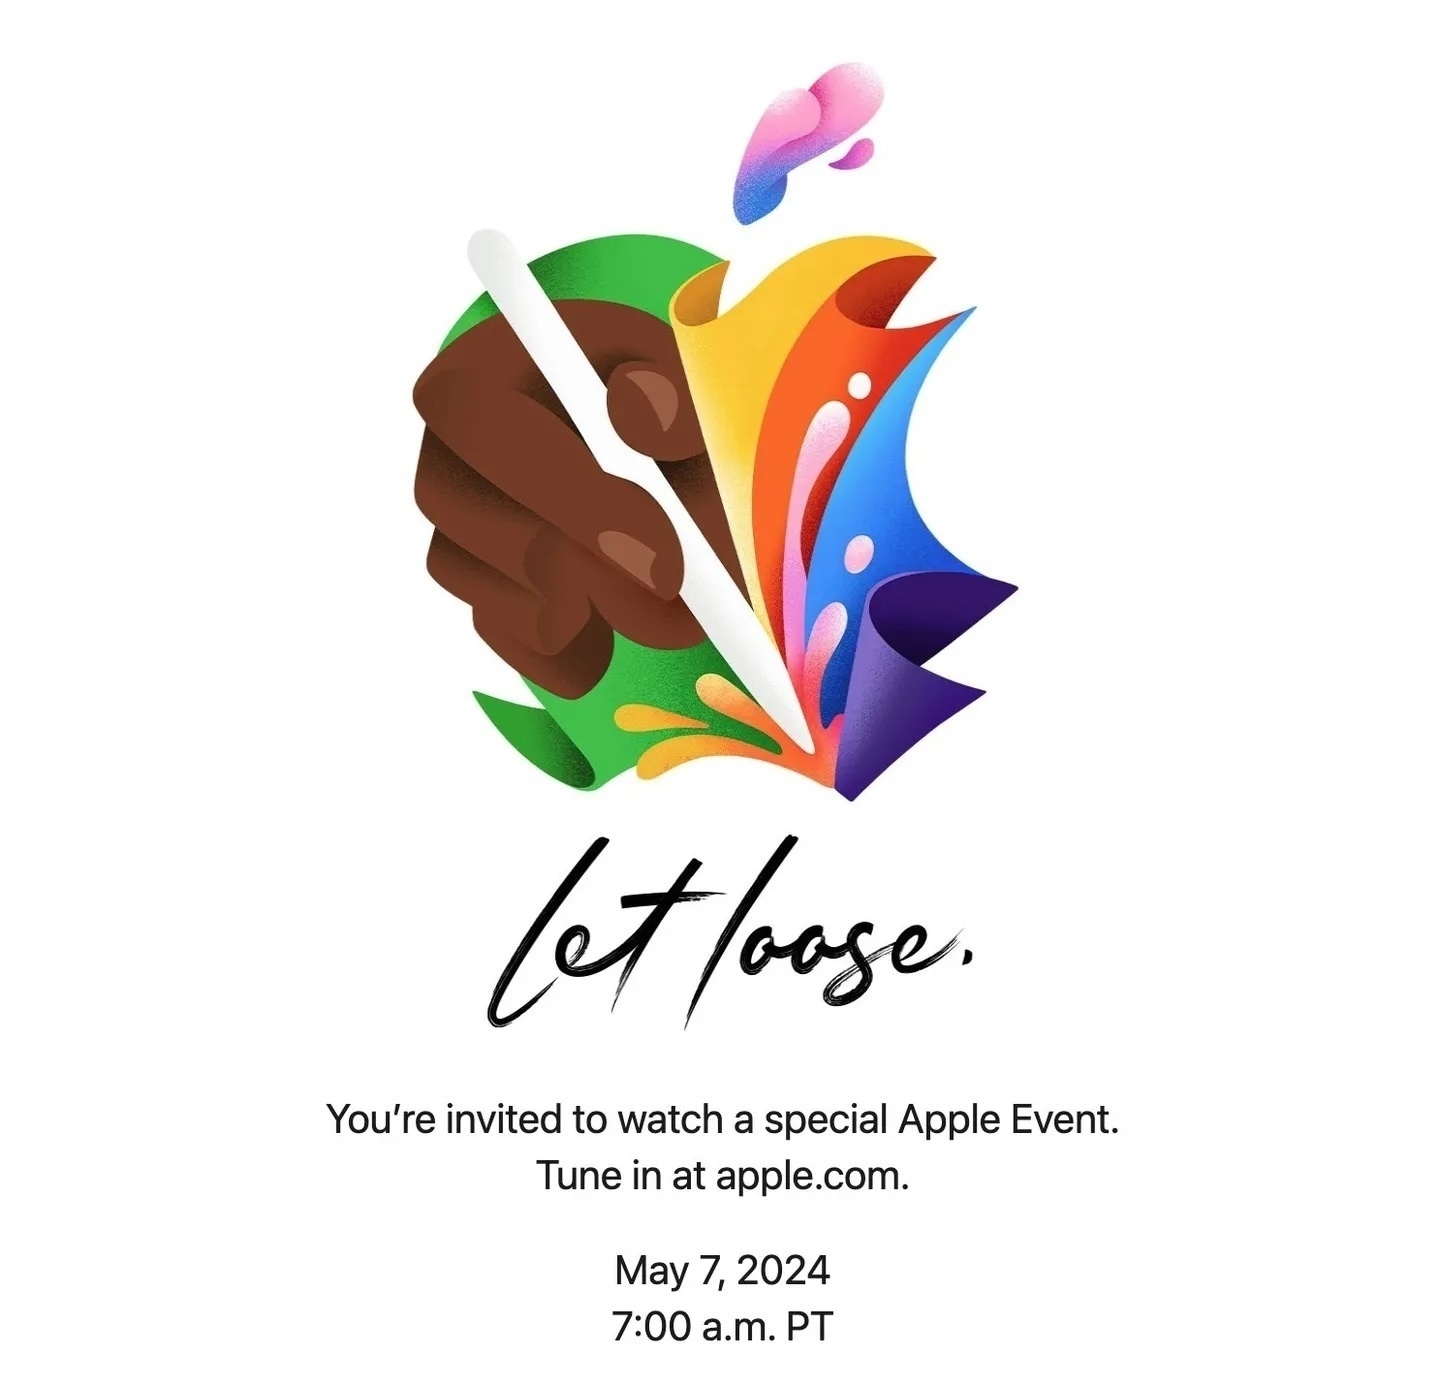 Announcement graphic for Apple's "Let Loose" event on May 7th. It features a variant of the Apple logo which appears to be made of splashes of color, along with a hand using an Apple Pencil.